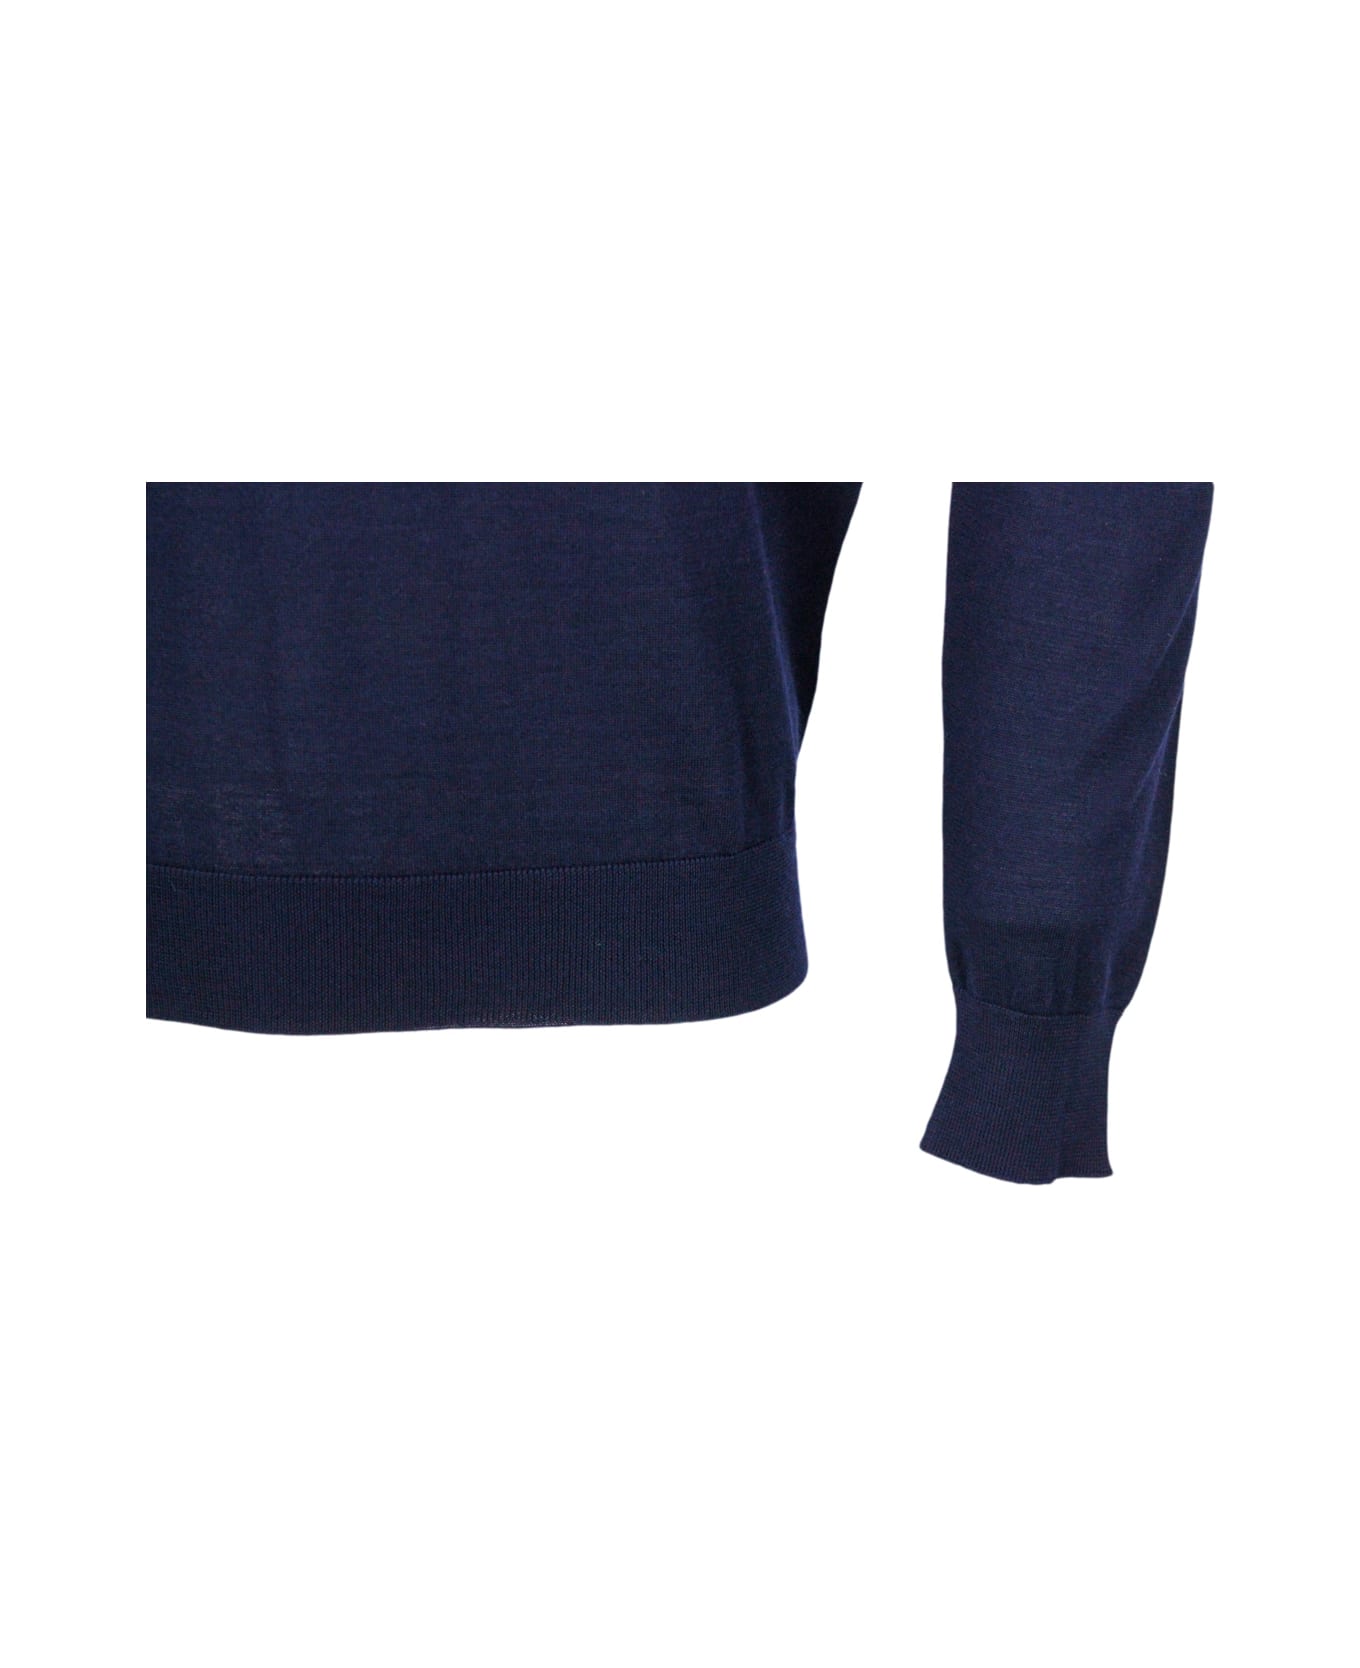 Colombo Light Crew Neck Long Sleeve Sweater In Fine 100% Cashmere And Silk With Special Processing On The Profile Of The Neck - Blu navy